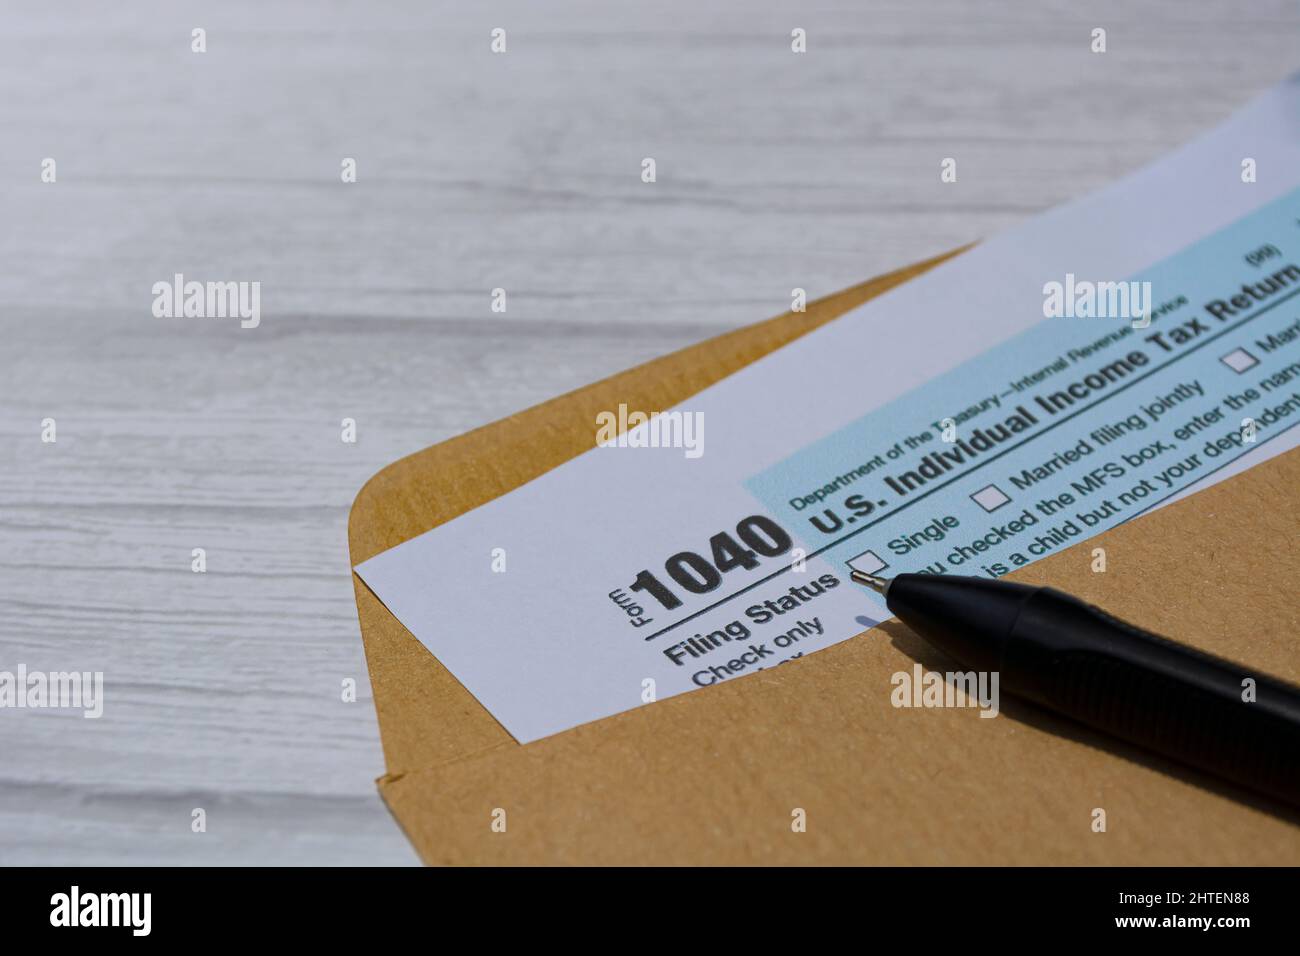 Tax forms 1040. U.S Individual Income Tax Return in an brown envelope on a desk. Stock Photo